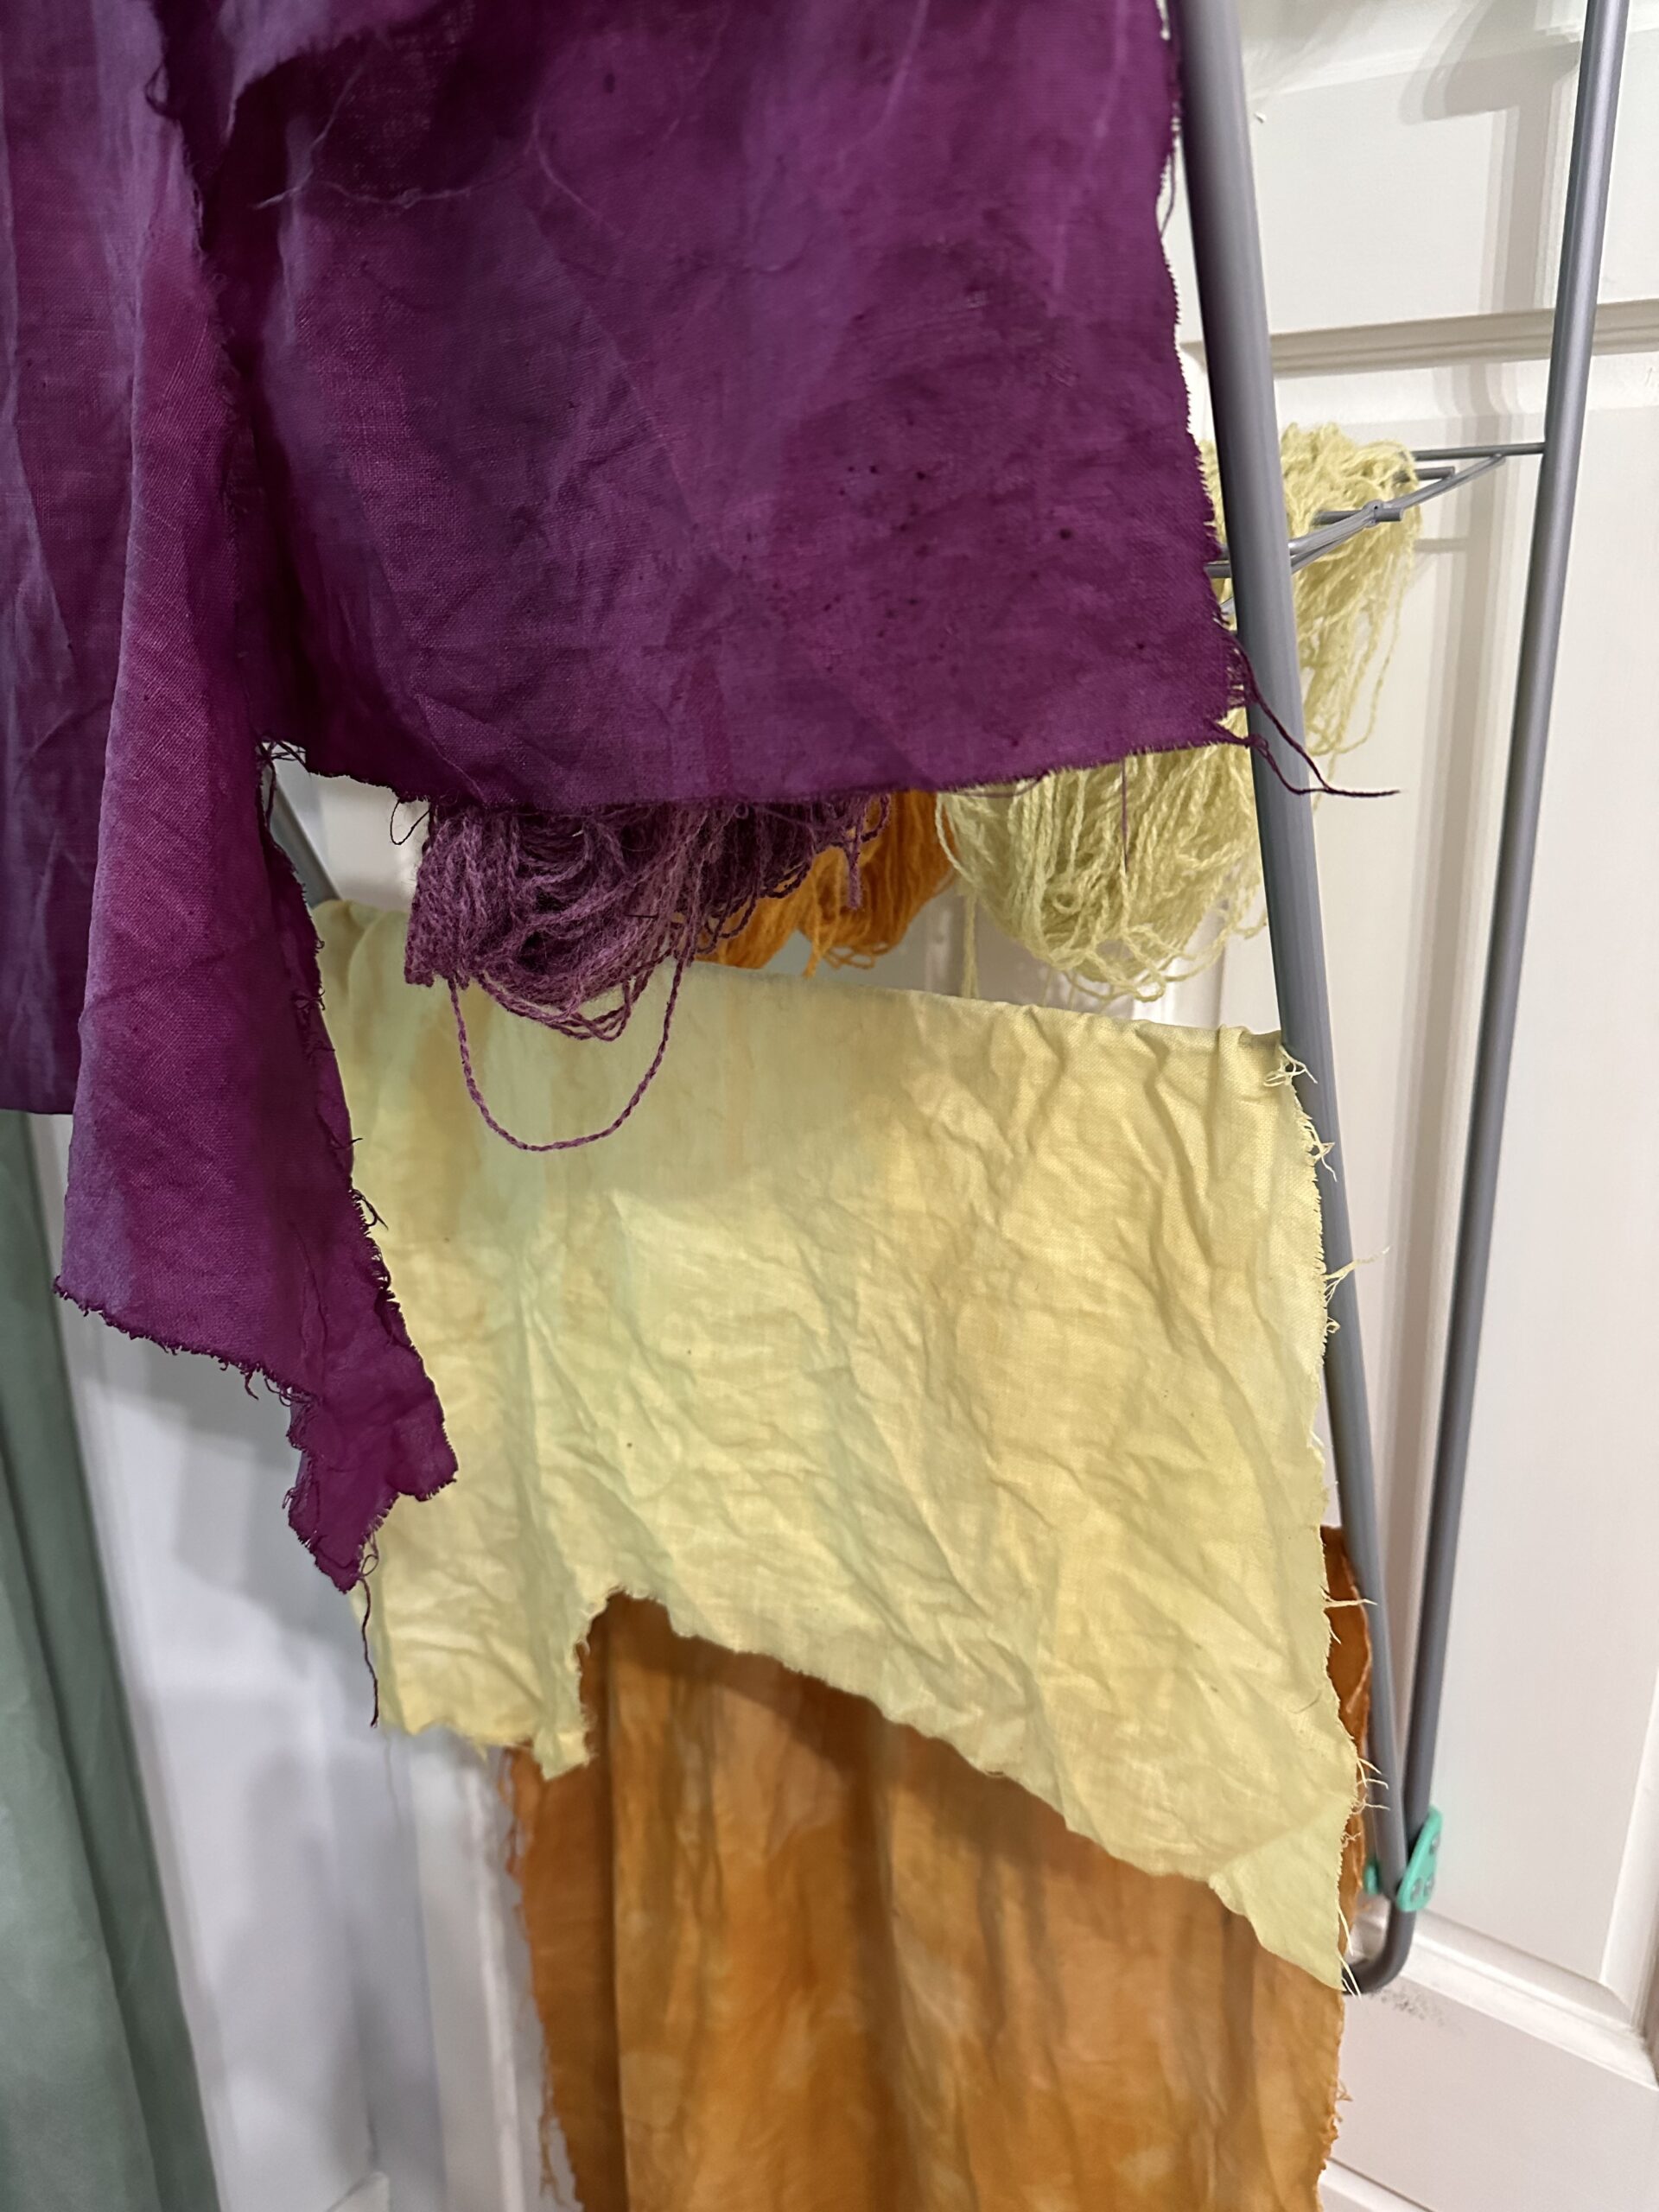 My first experiments in natural dyeing